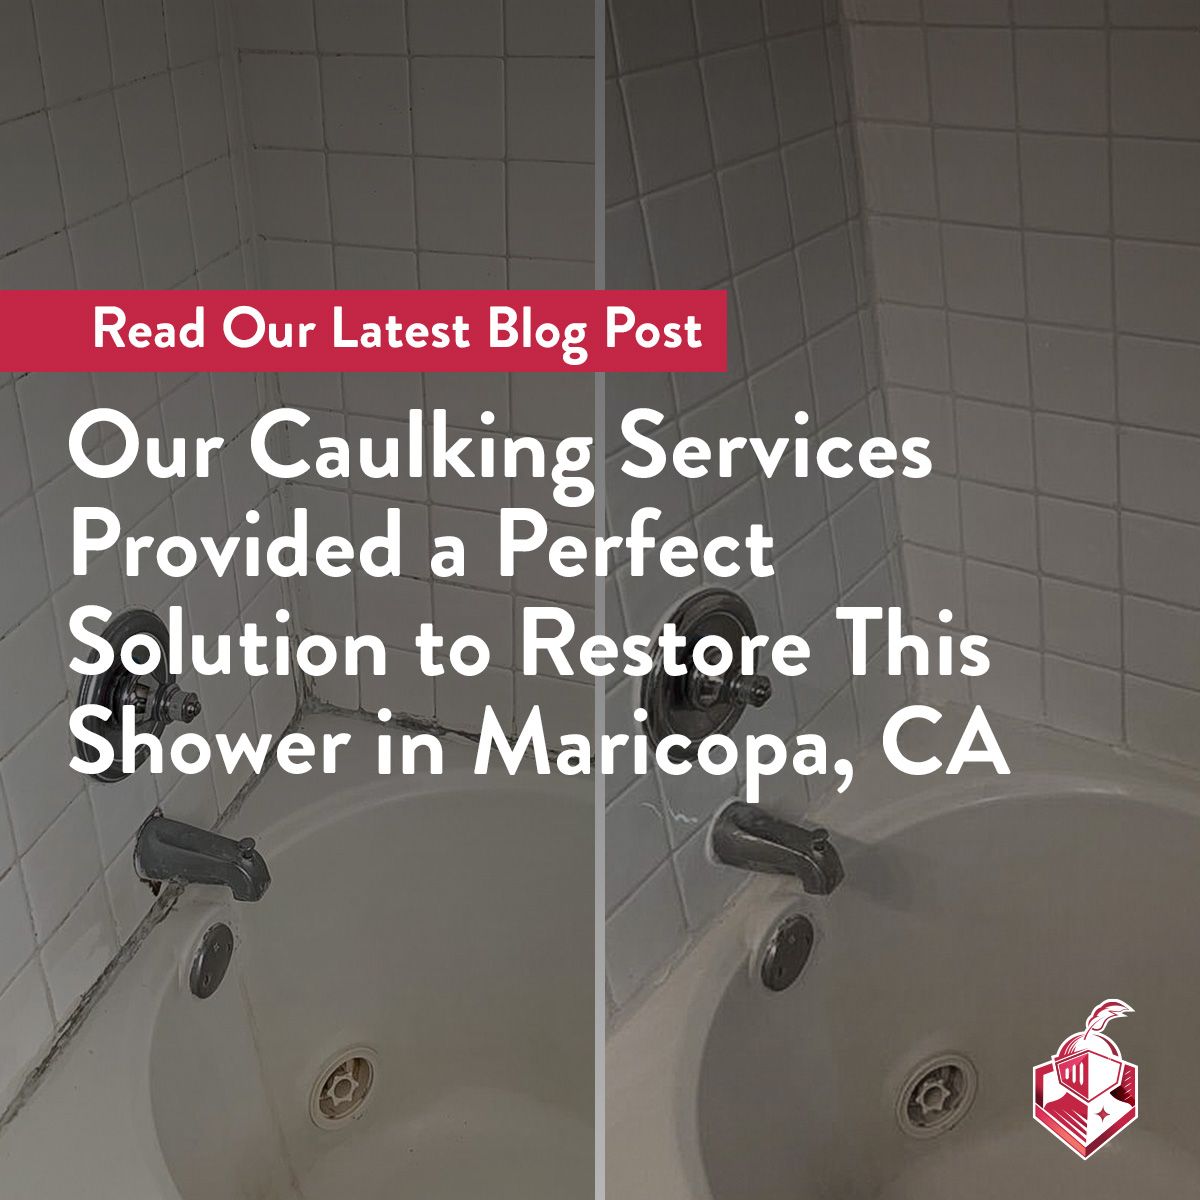 Our caulking services provided a perfect solution to restore this shower in Maricopa, CA!